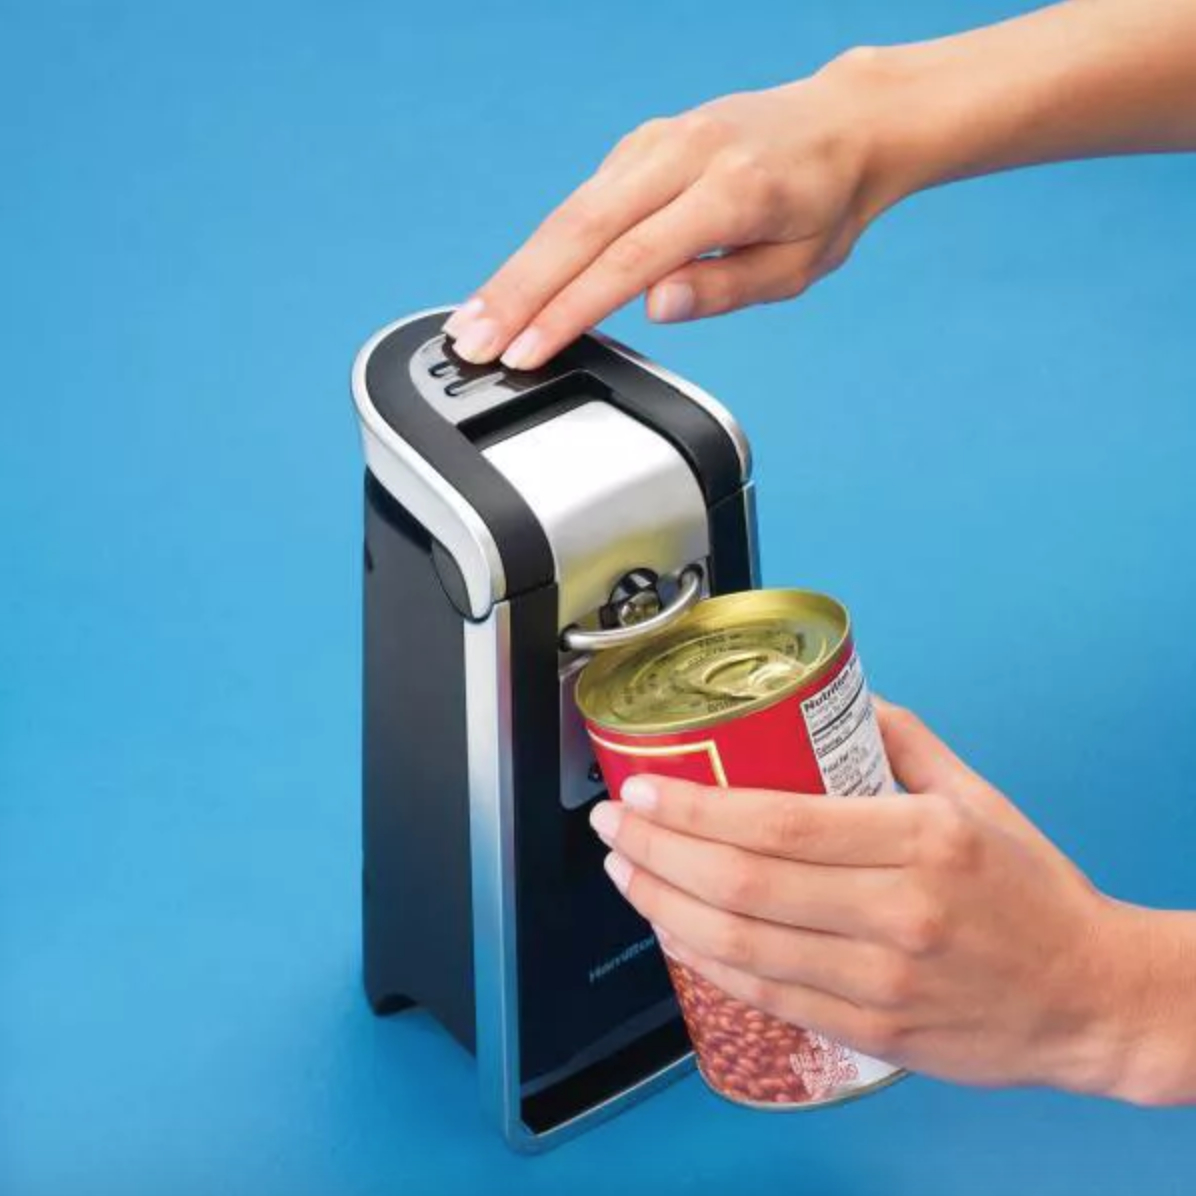 a person using an electric can opener to open a can of beans